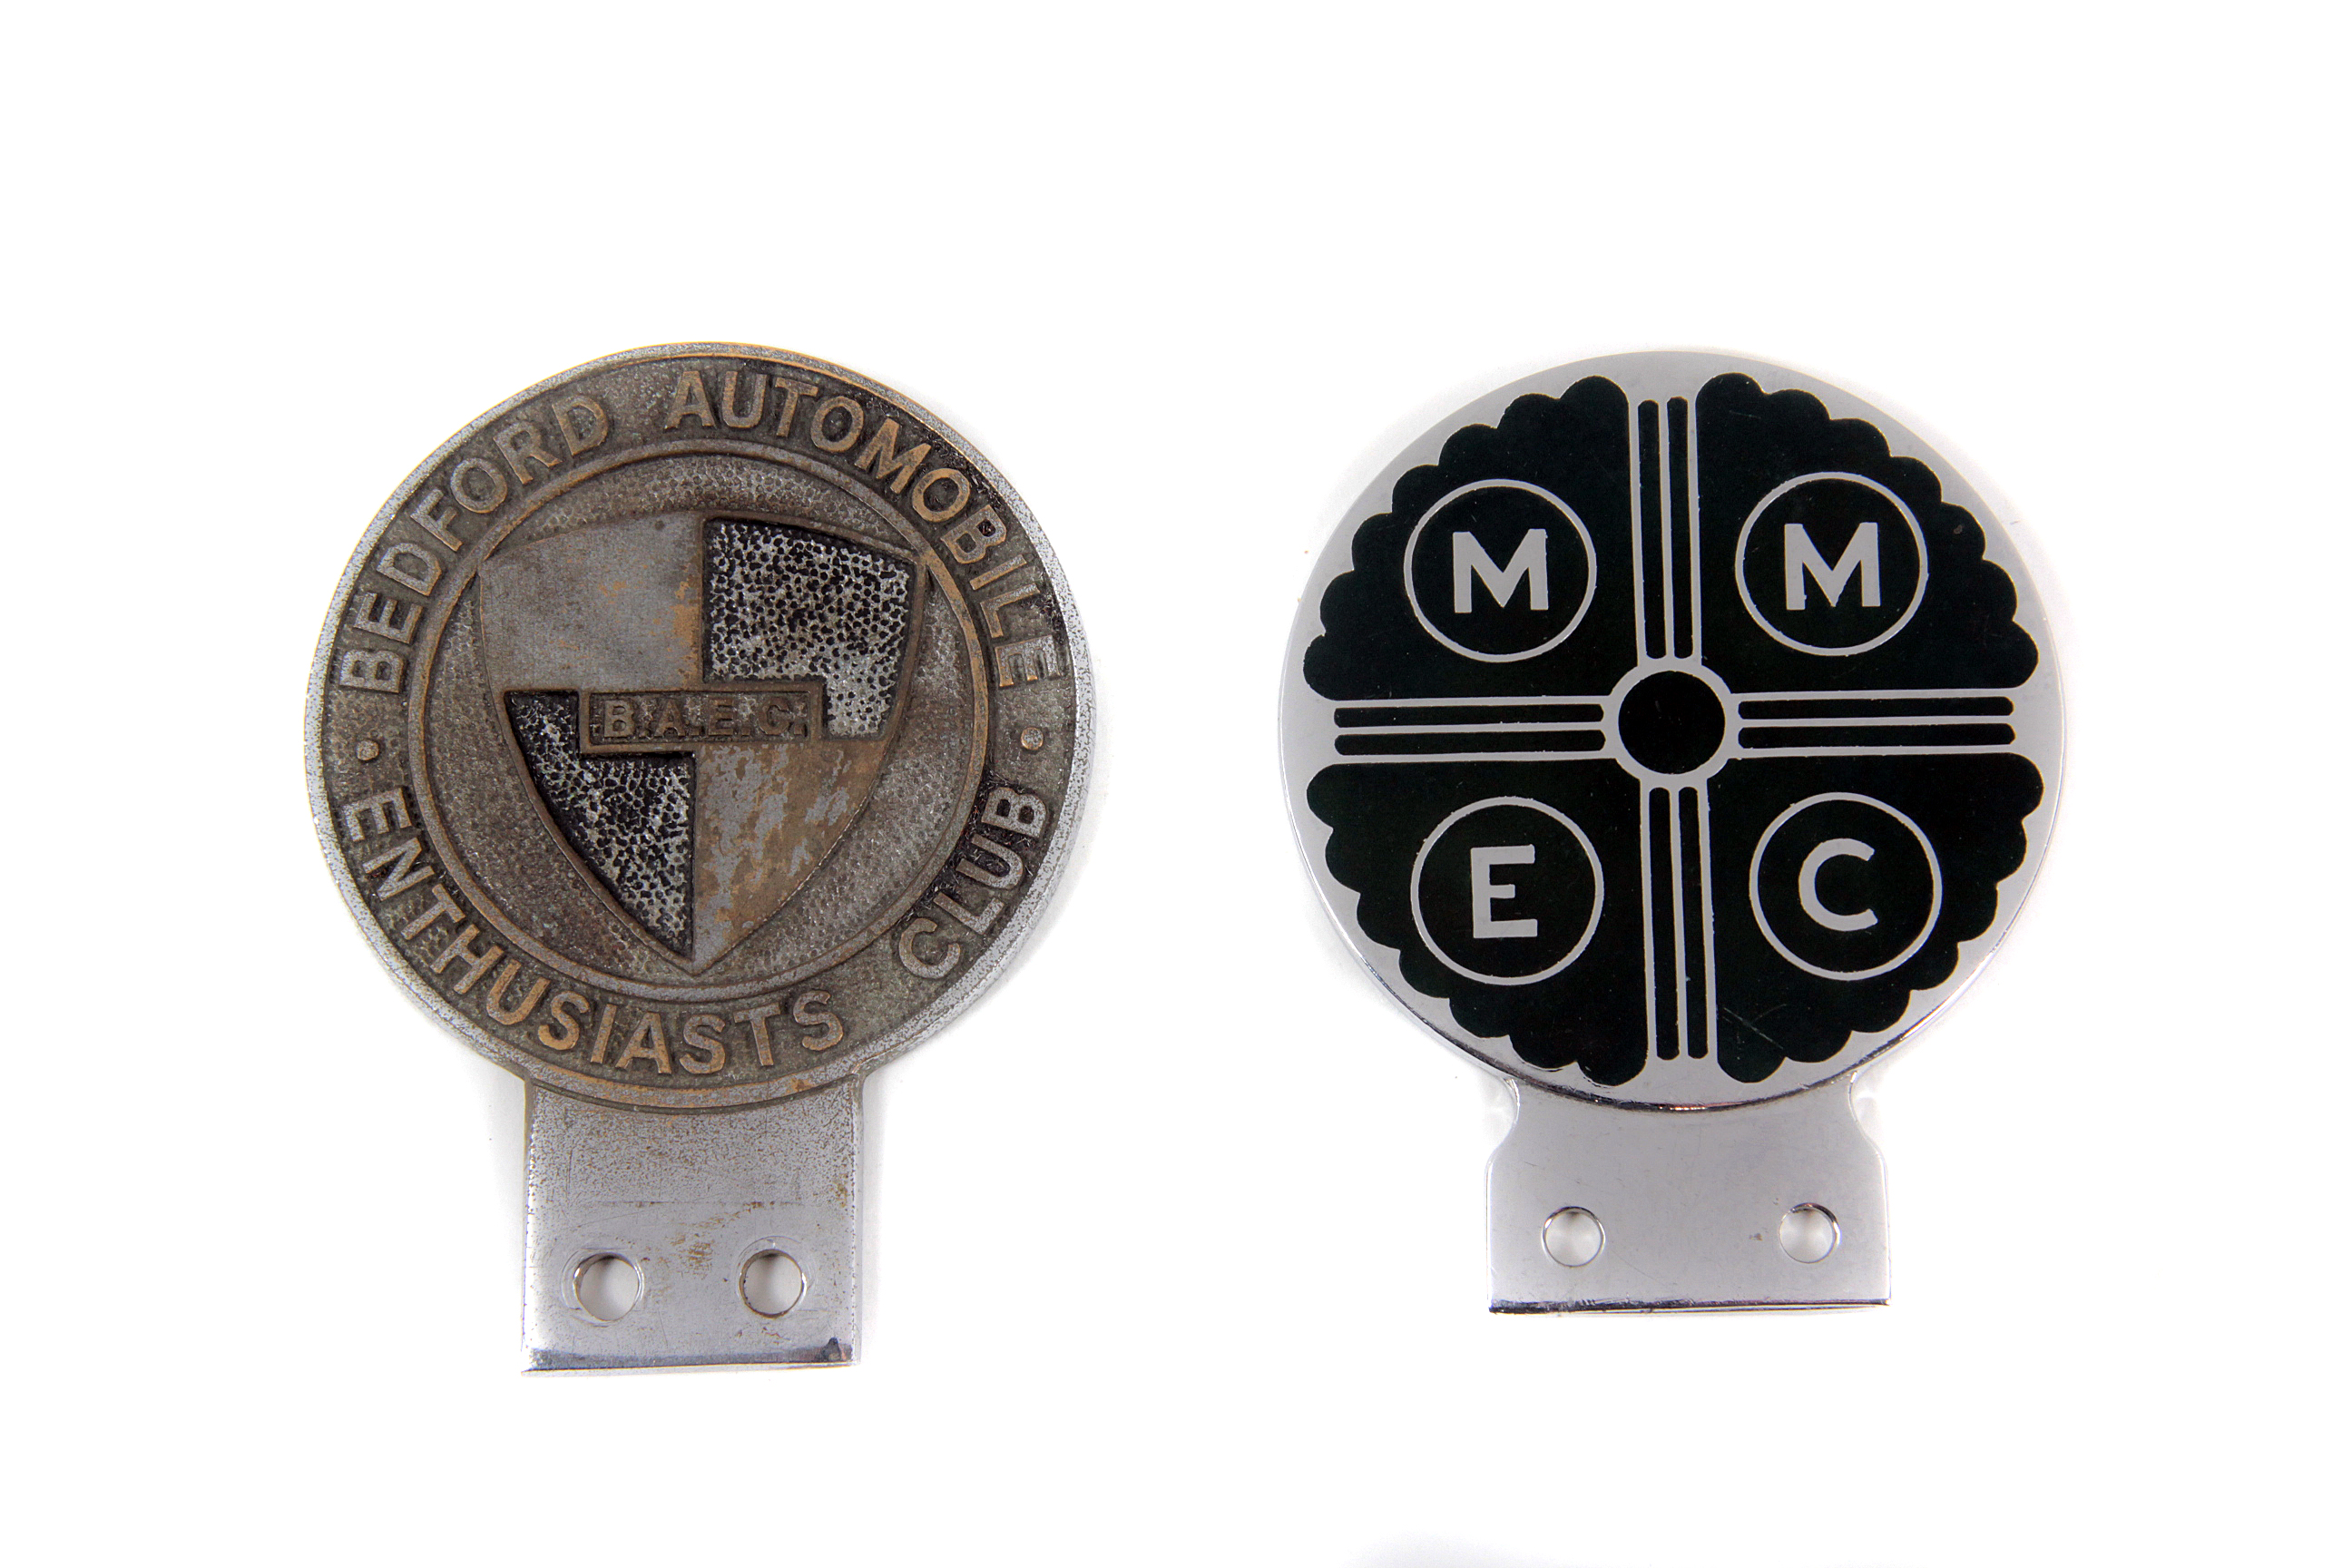 Midland Motor Enthusiasts Club and Bedford Automobile Enthusiasts Club: two members car badges